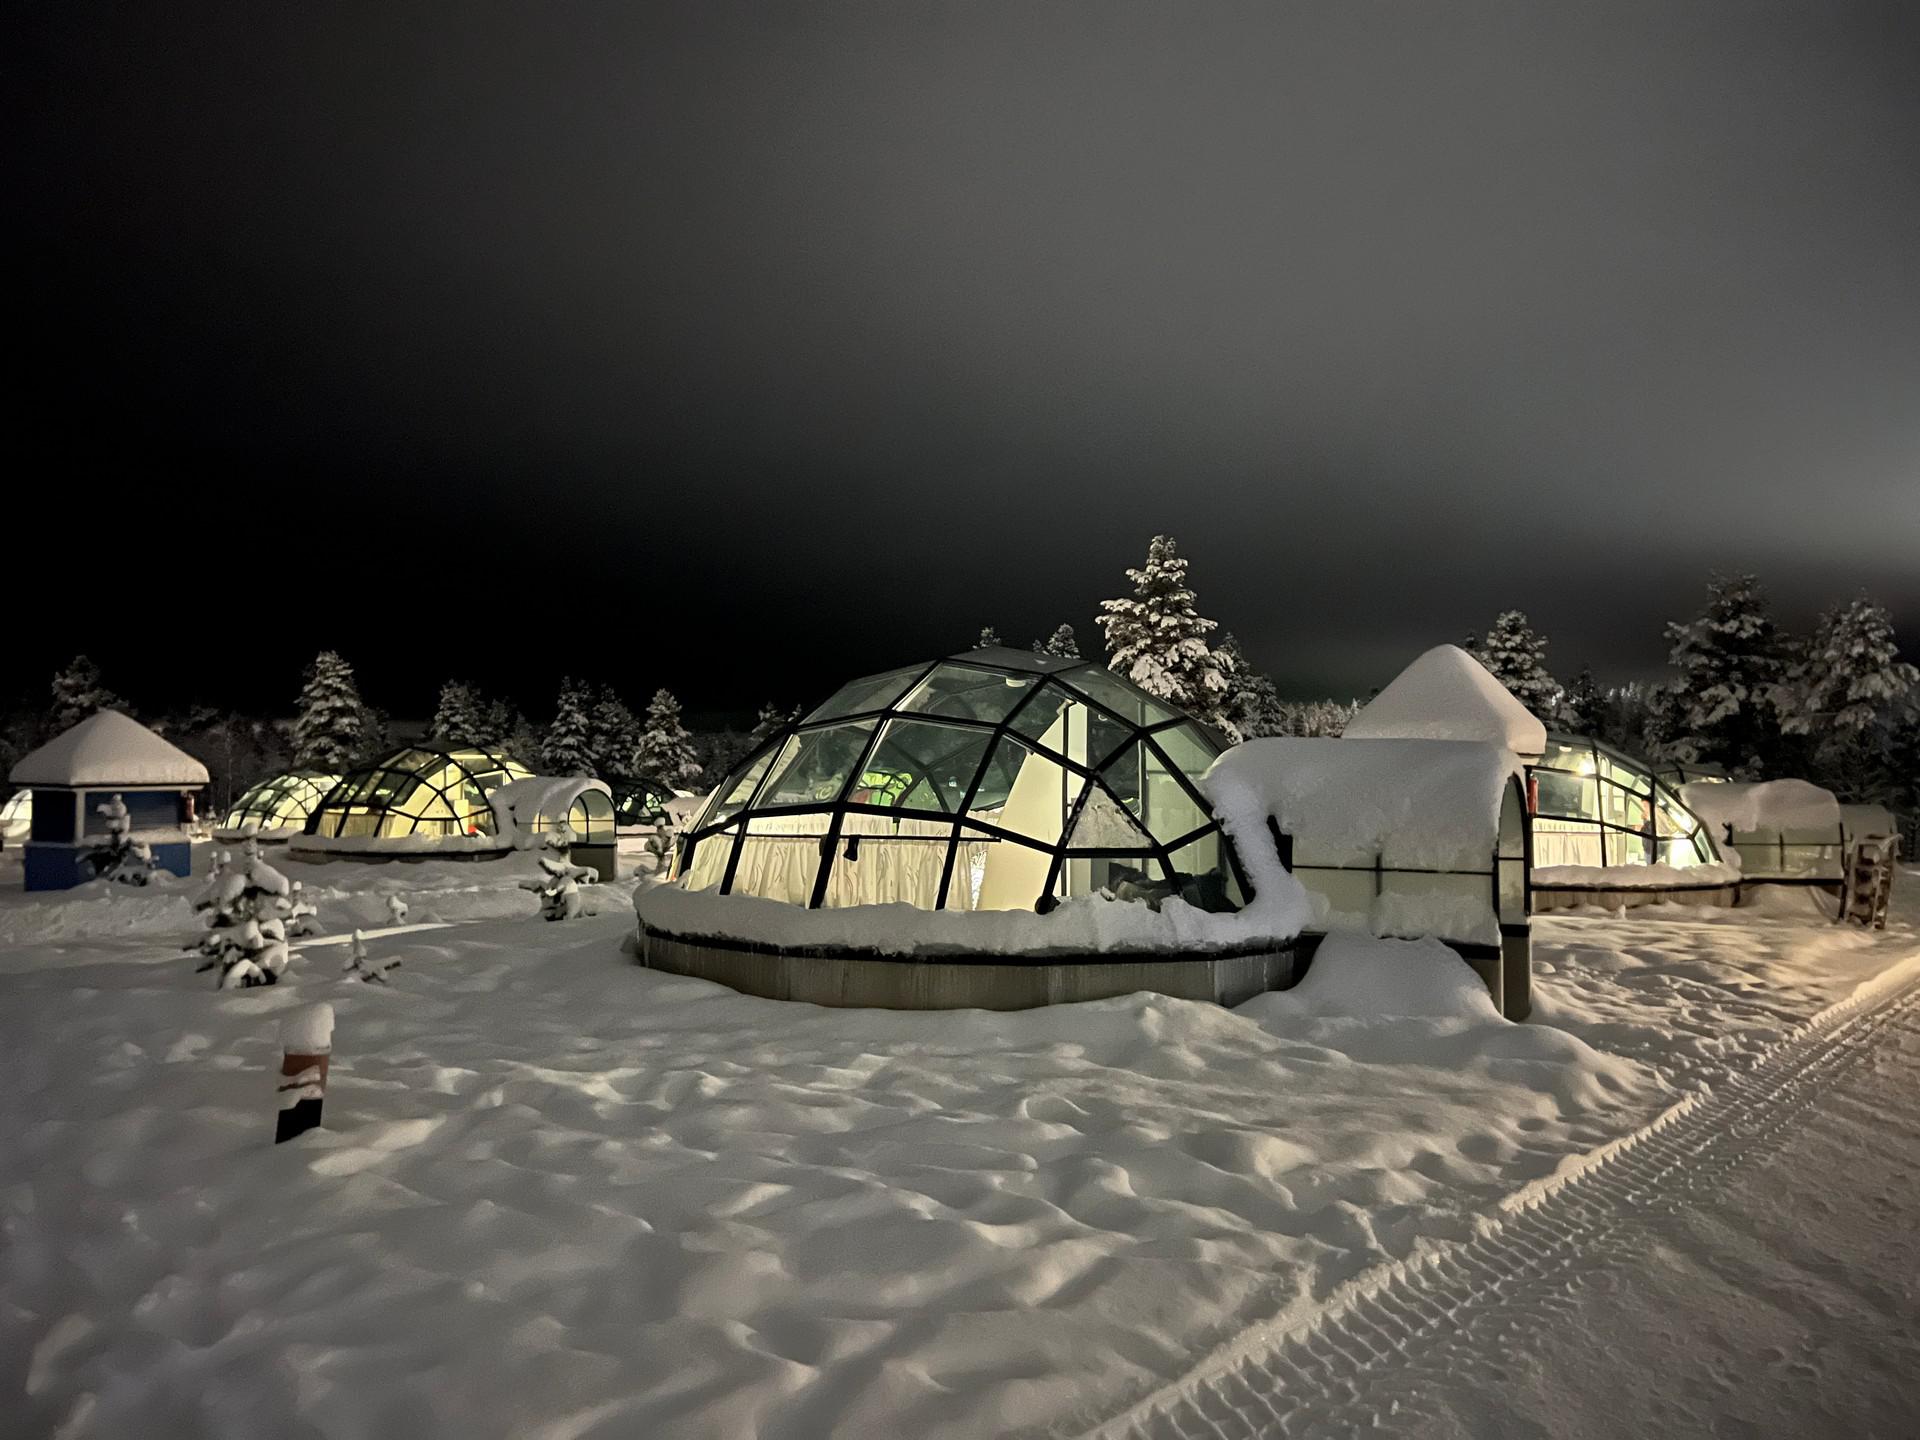 Glass igloo at night in Ivalo, Finland. The Lapland Series reflection post